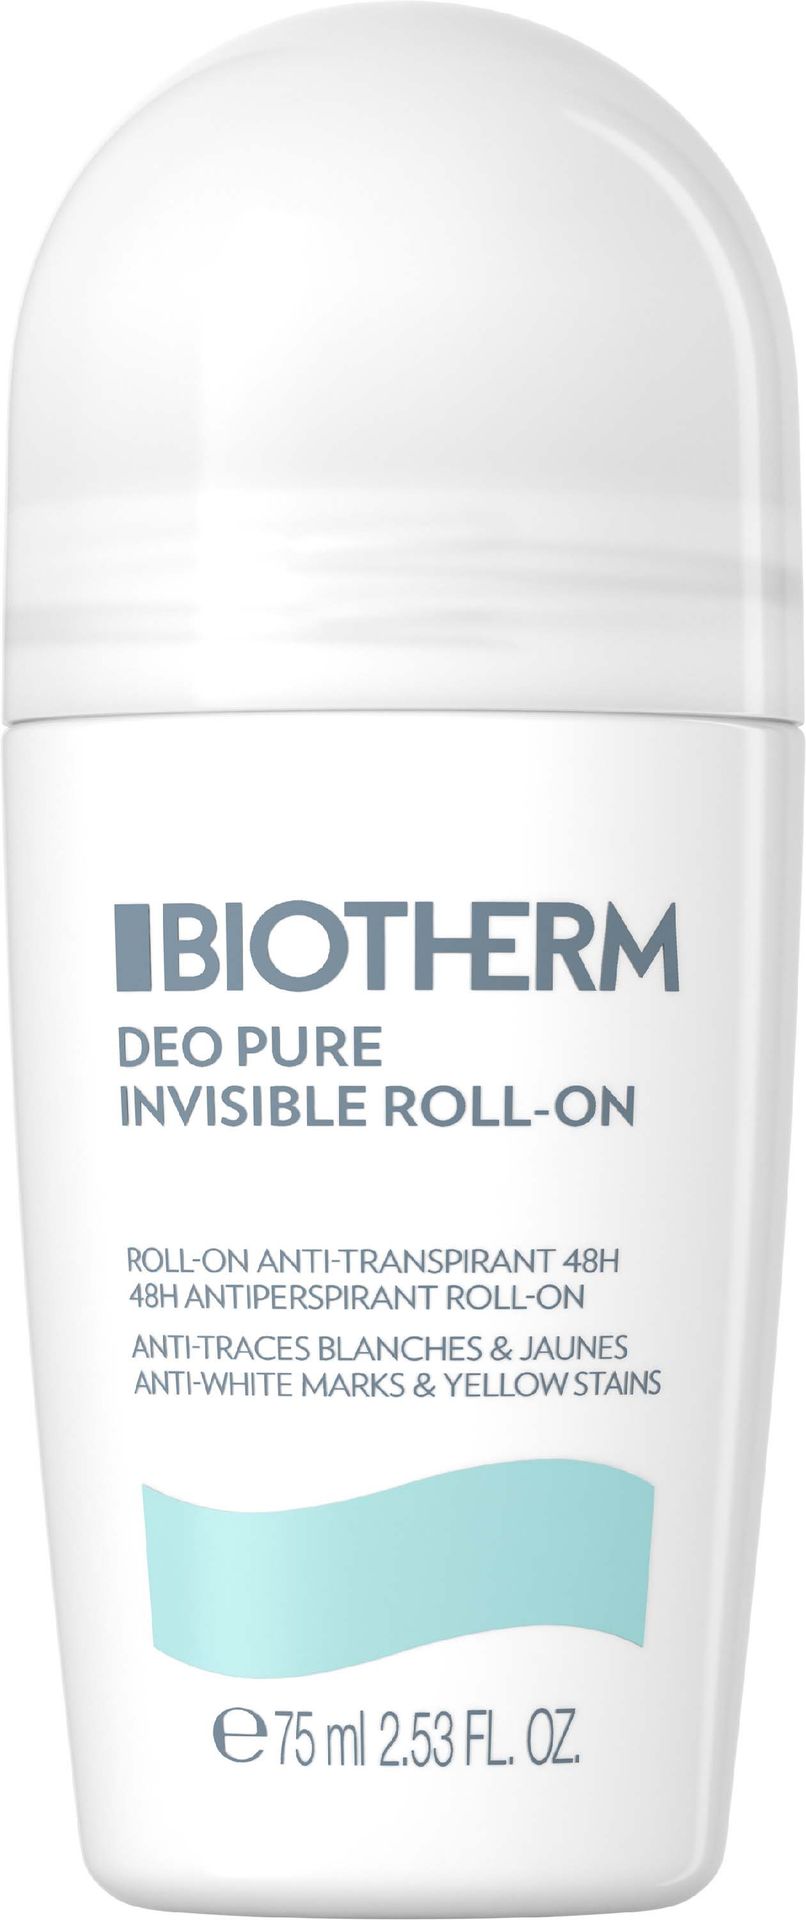 Biotherm Deo Pure Invisible 75ml